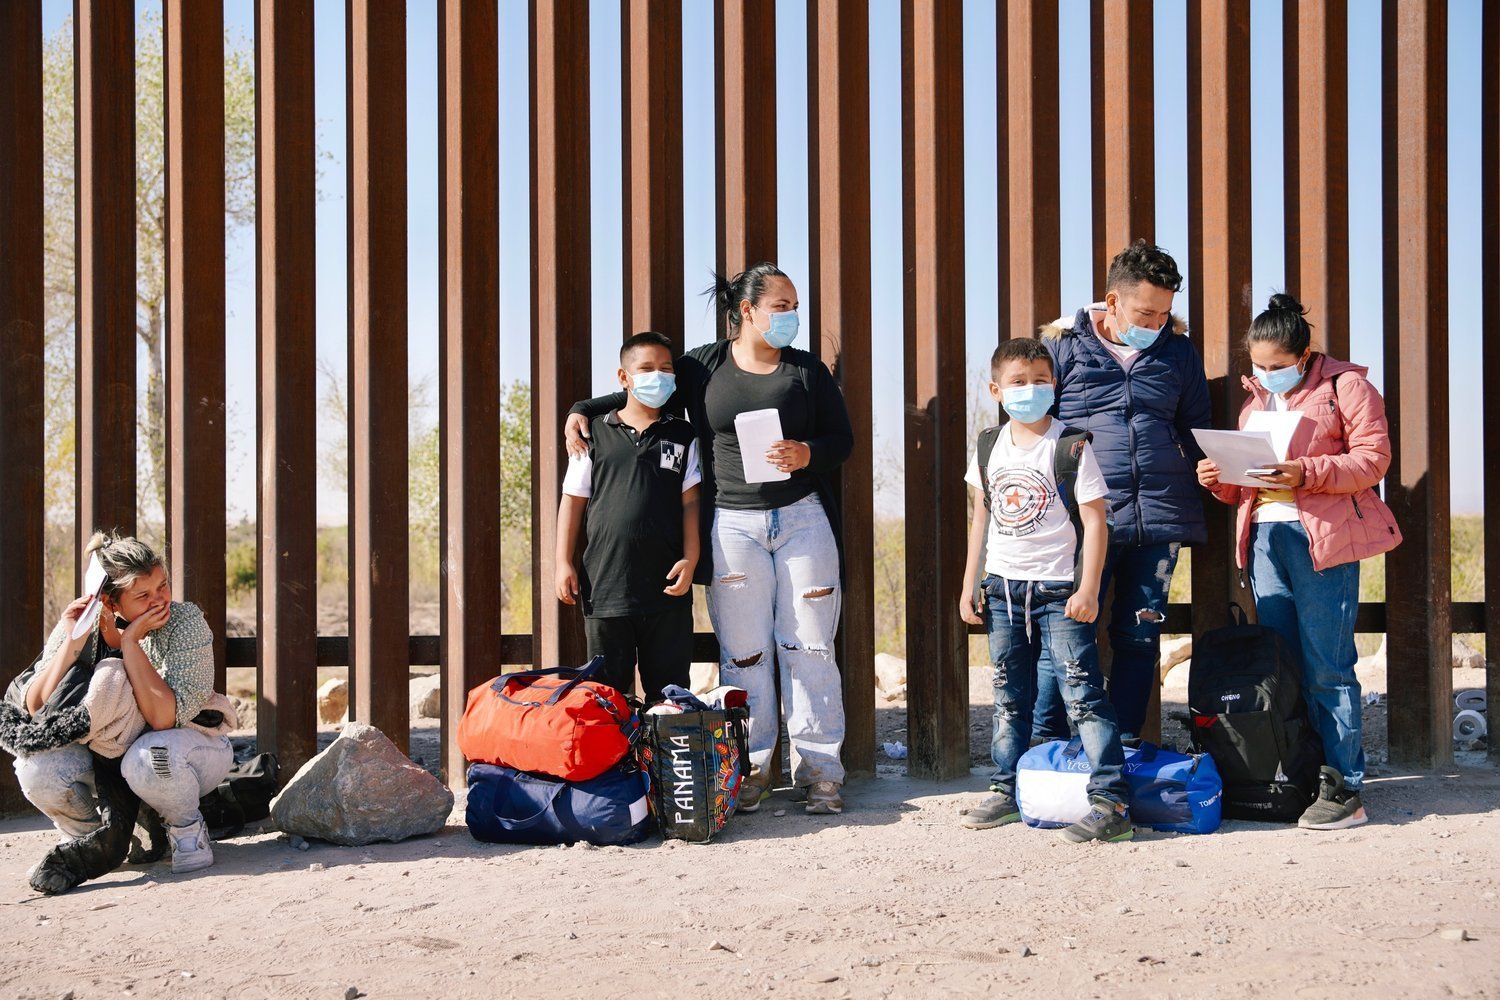  A group of migrants from Cuba, Venezuela, and Colombia wait at the USA border wall in Yuma, Arizona, to turn themselves into US Border Patrol and ask for Asylum. 